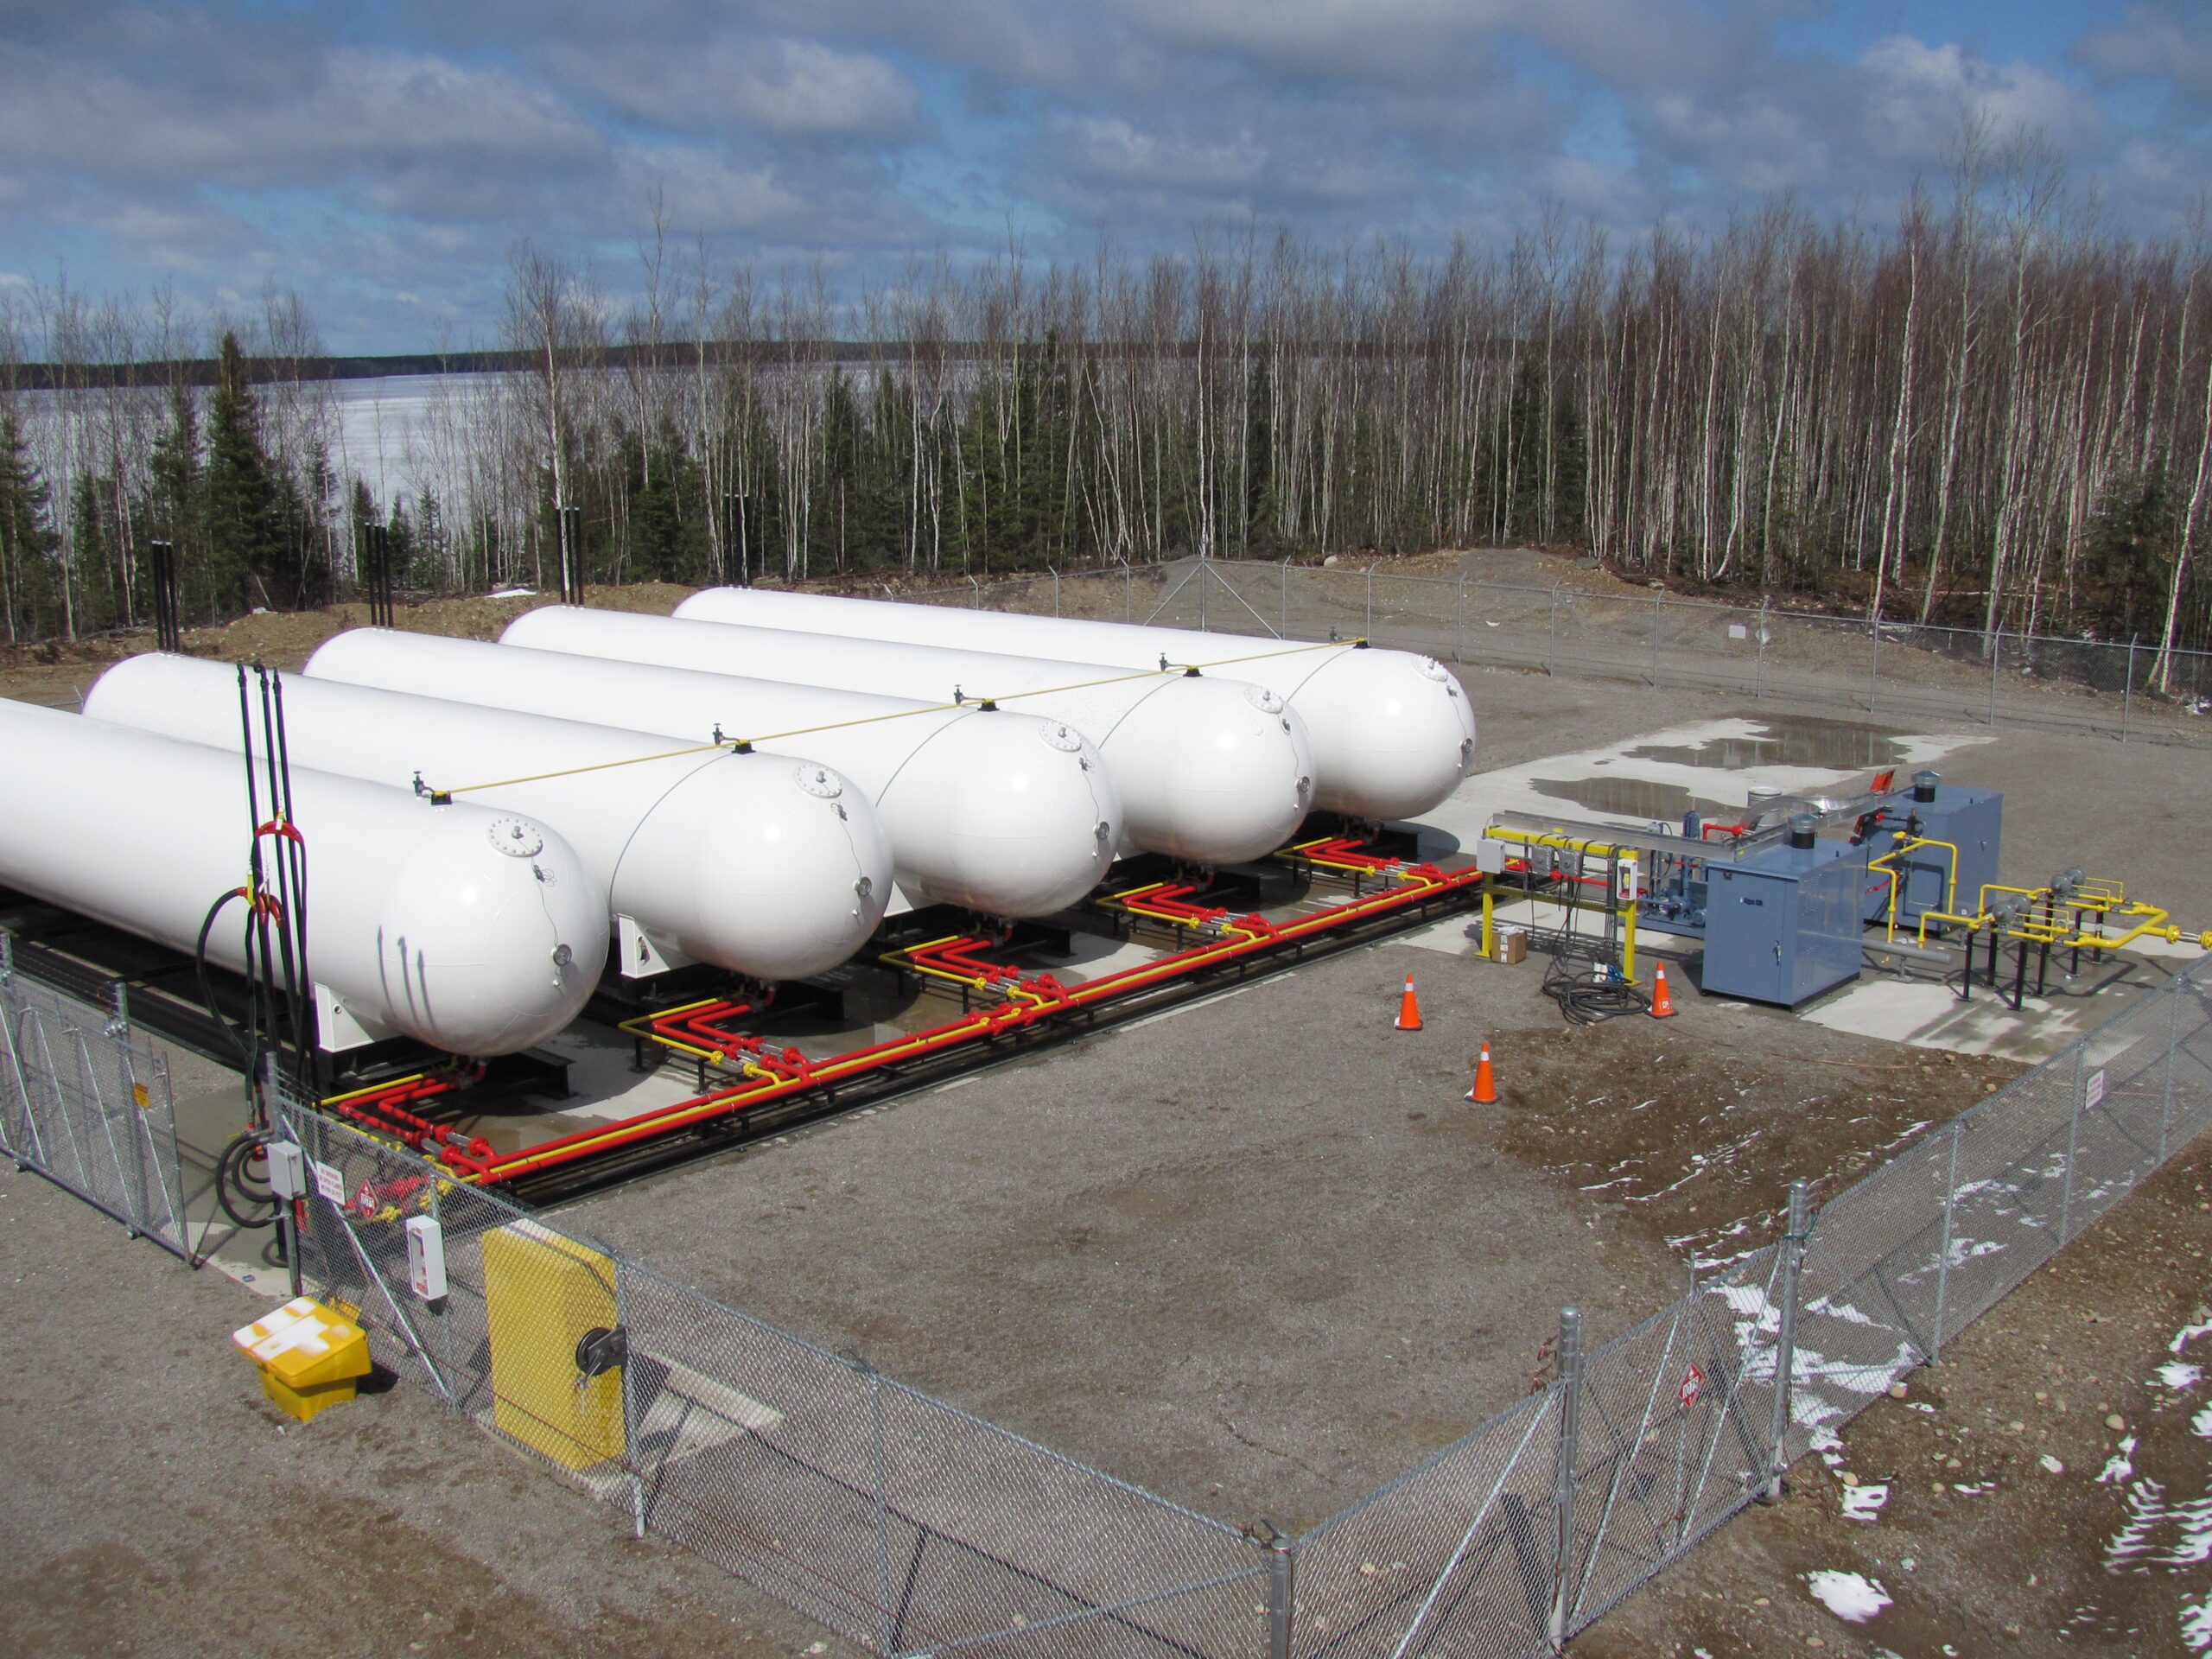 Several propane tanks arranged in a row on a gravel surface. The tanks are large and cylindrical in shape, with a silver metal exterior and black caps. Some tanks are partially covered with yellow caution tape. In the background, there are trees and bushes visible